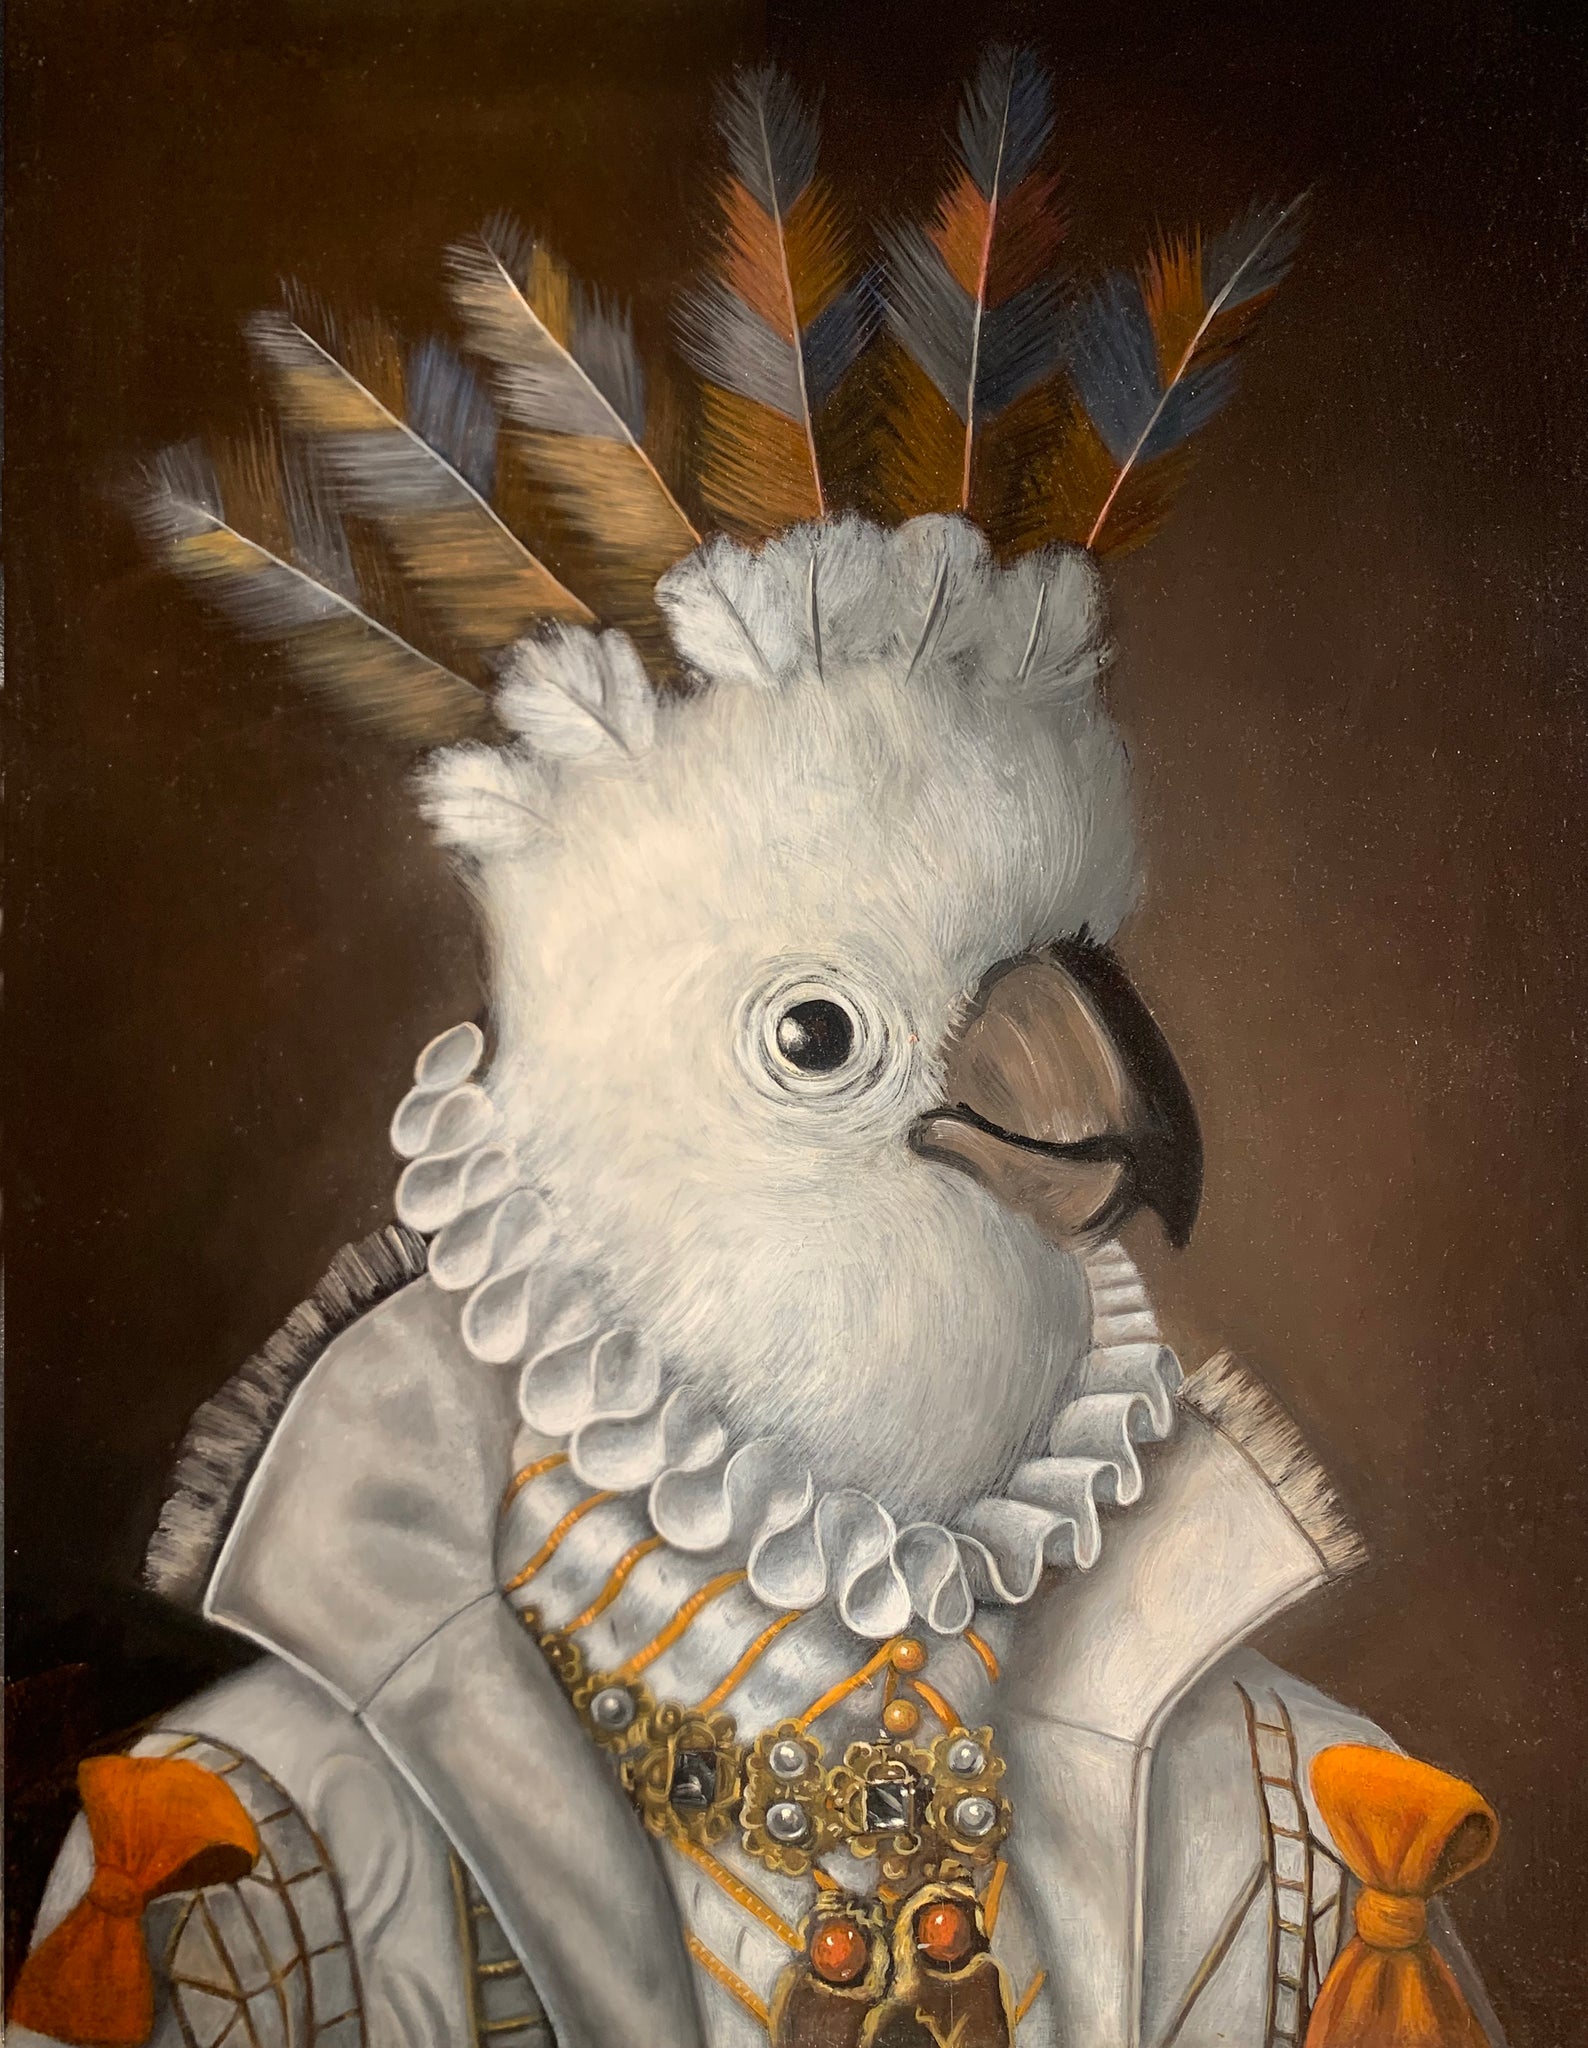 Amy Hill, "Bird with Orange Bows" SOLD